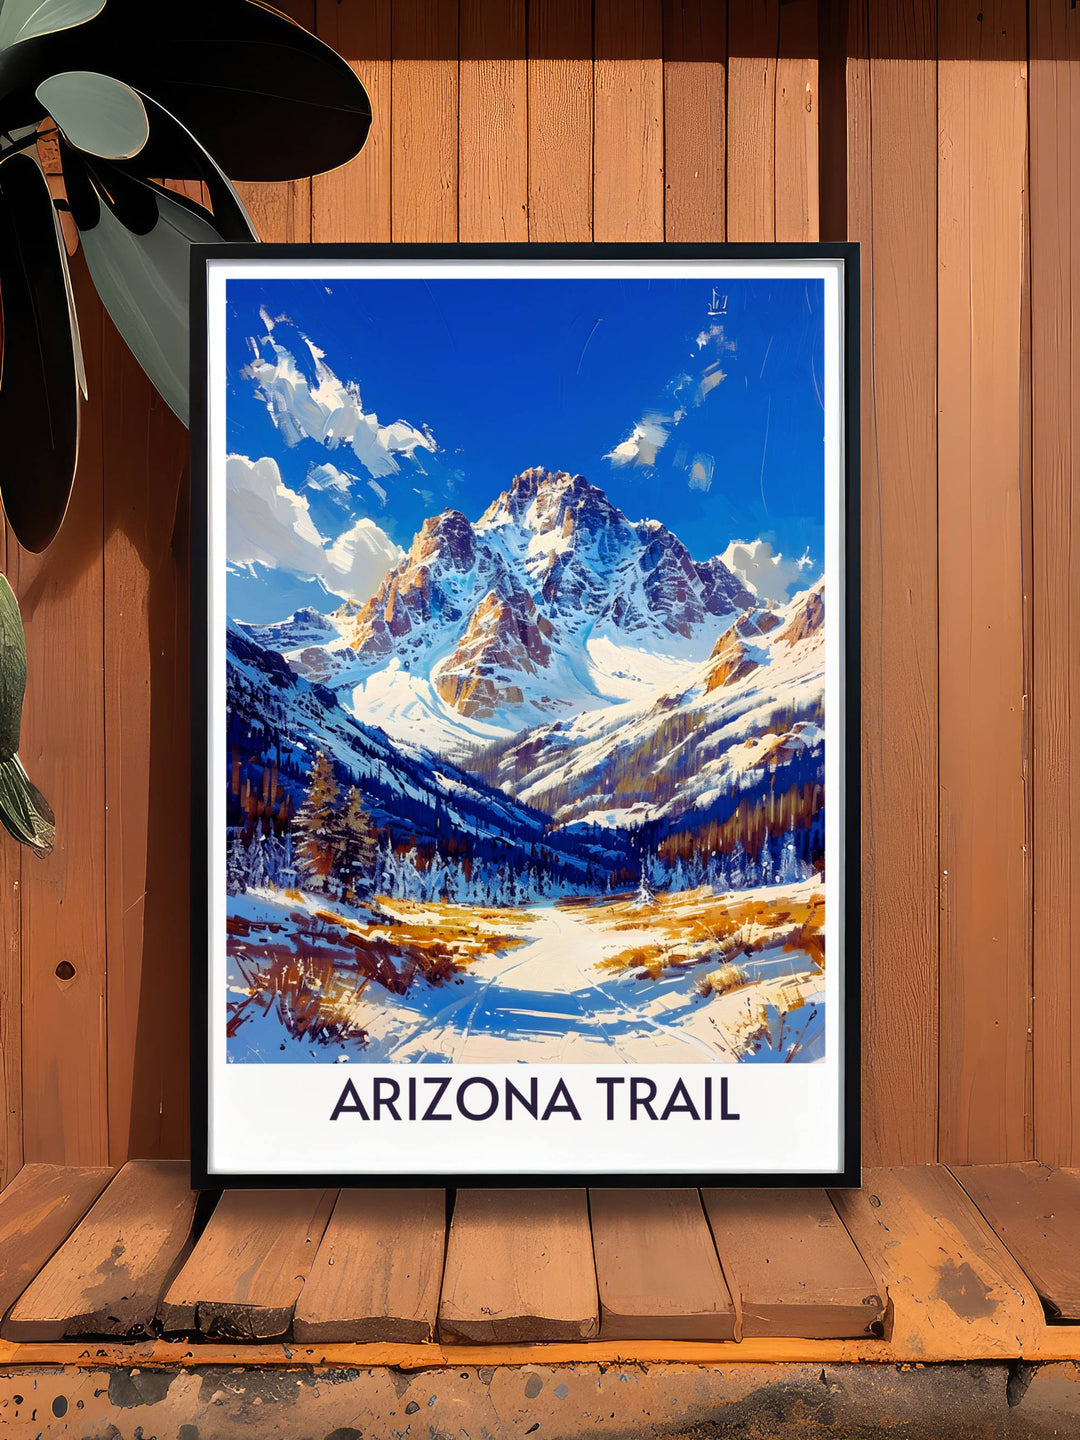 Arizona Trail Map and San Francisco Peaks Park print designed for hiking enthusiasts celebrating the spirit of exploration and the breathtaking landscapes of Americas national parks perfect for home or office decor.